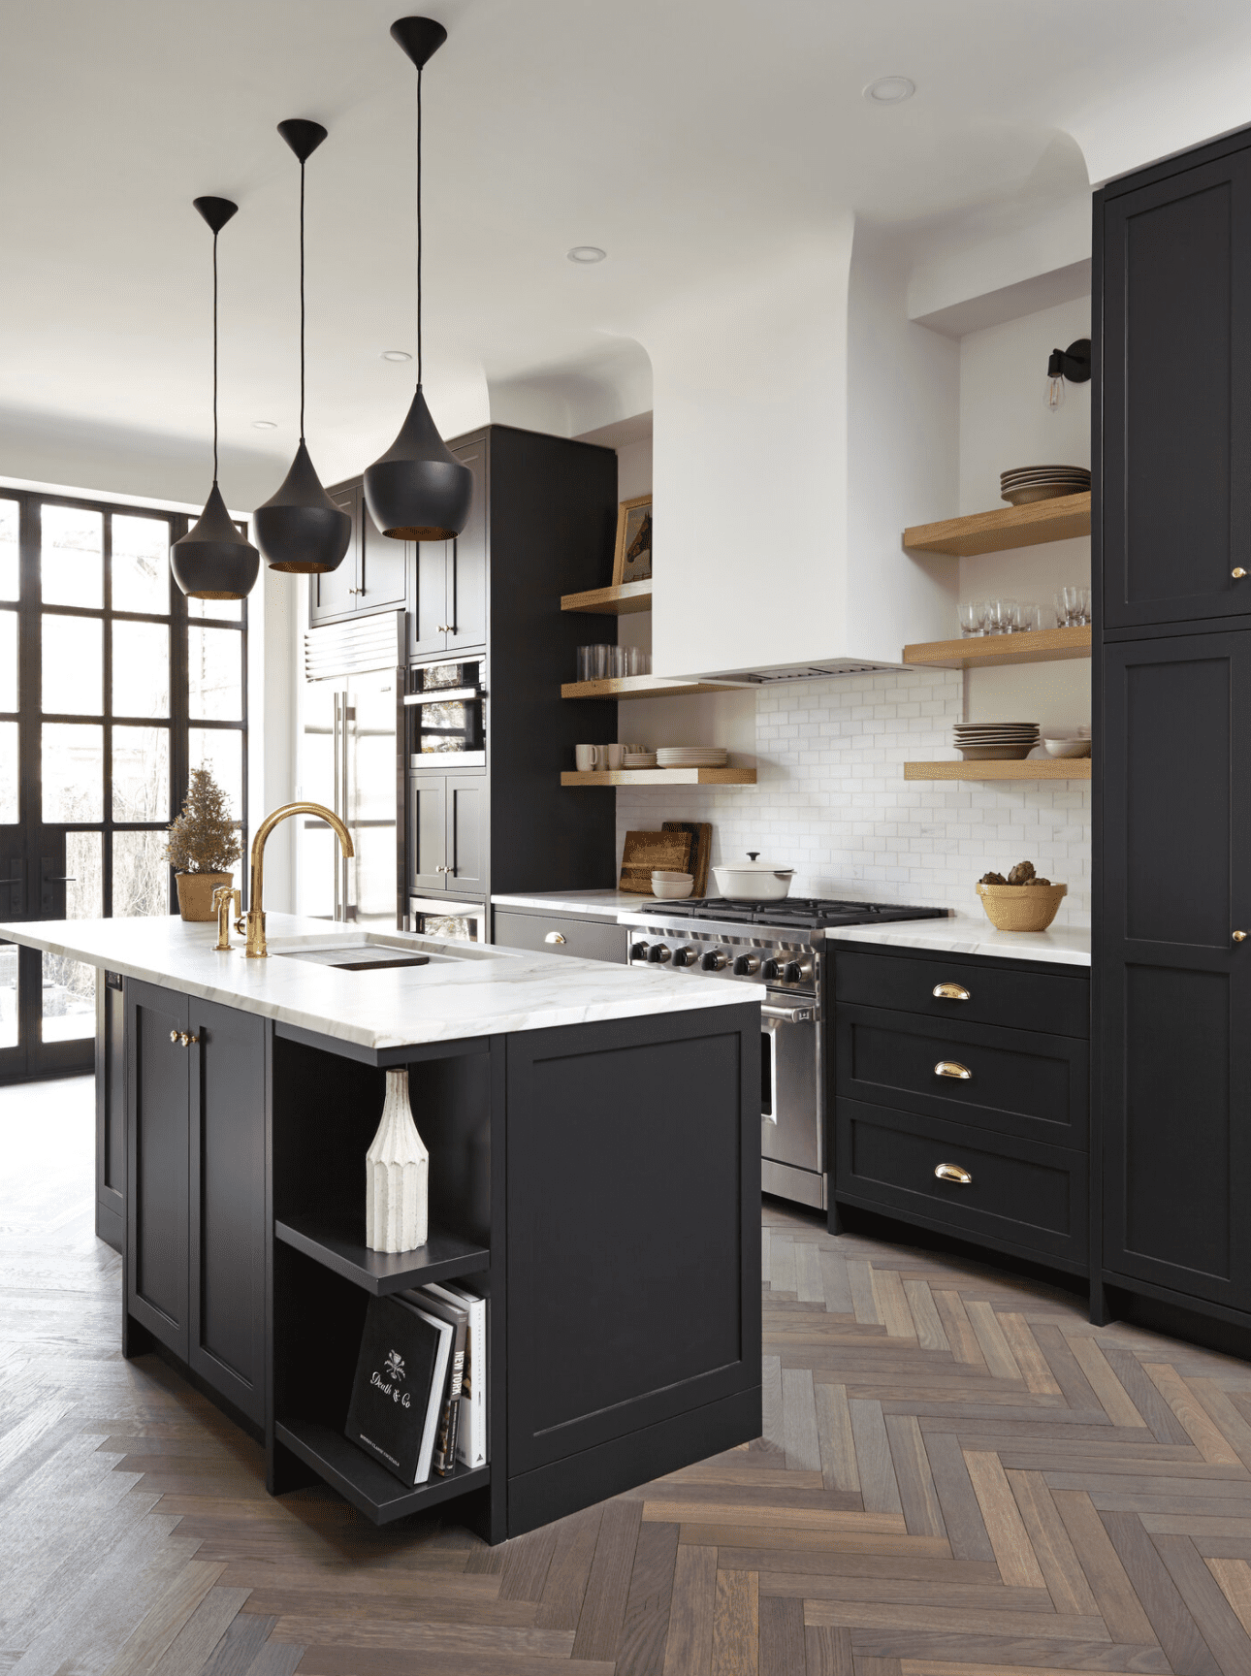 9 Modern Kitchen Ideas to Give Your Space New Life - kitchen modern pictures